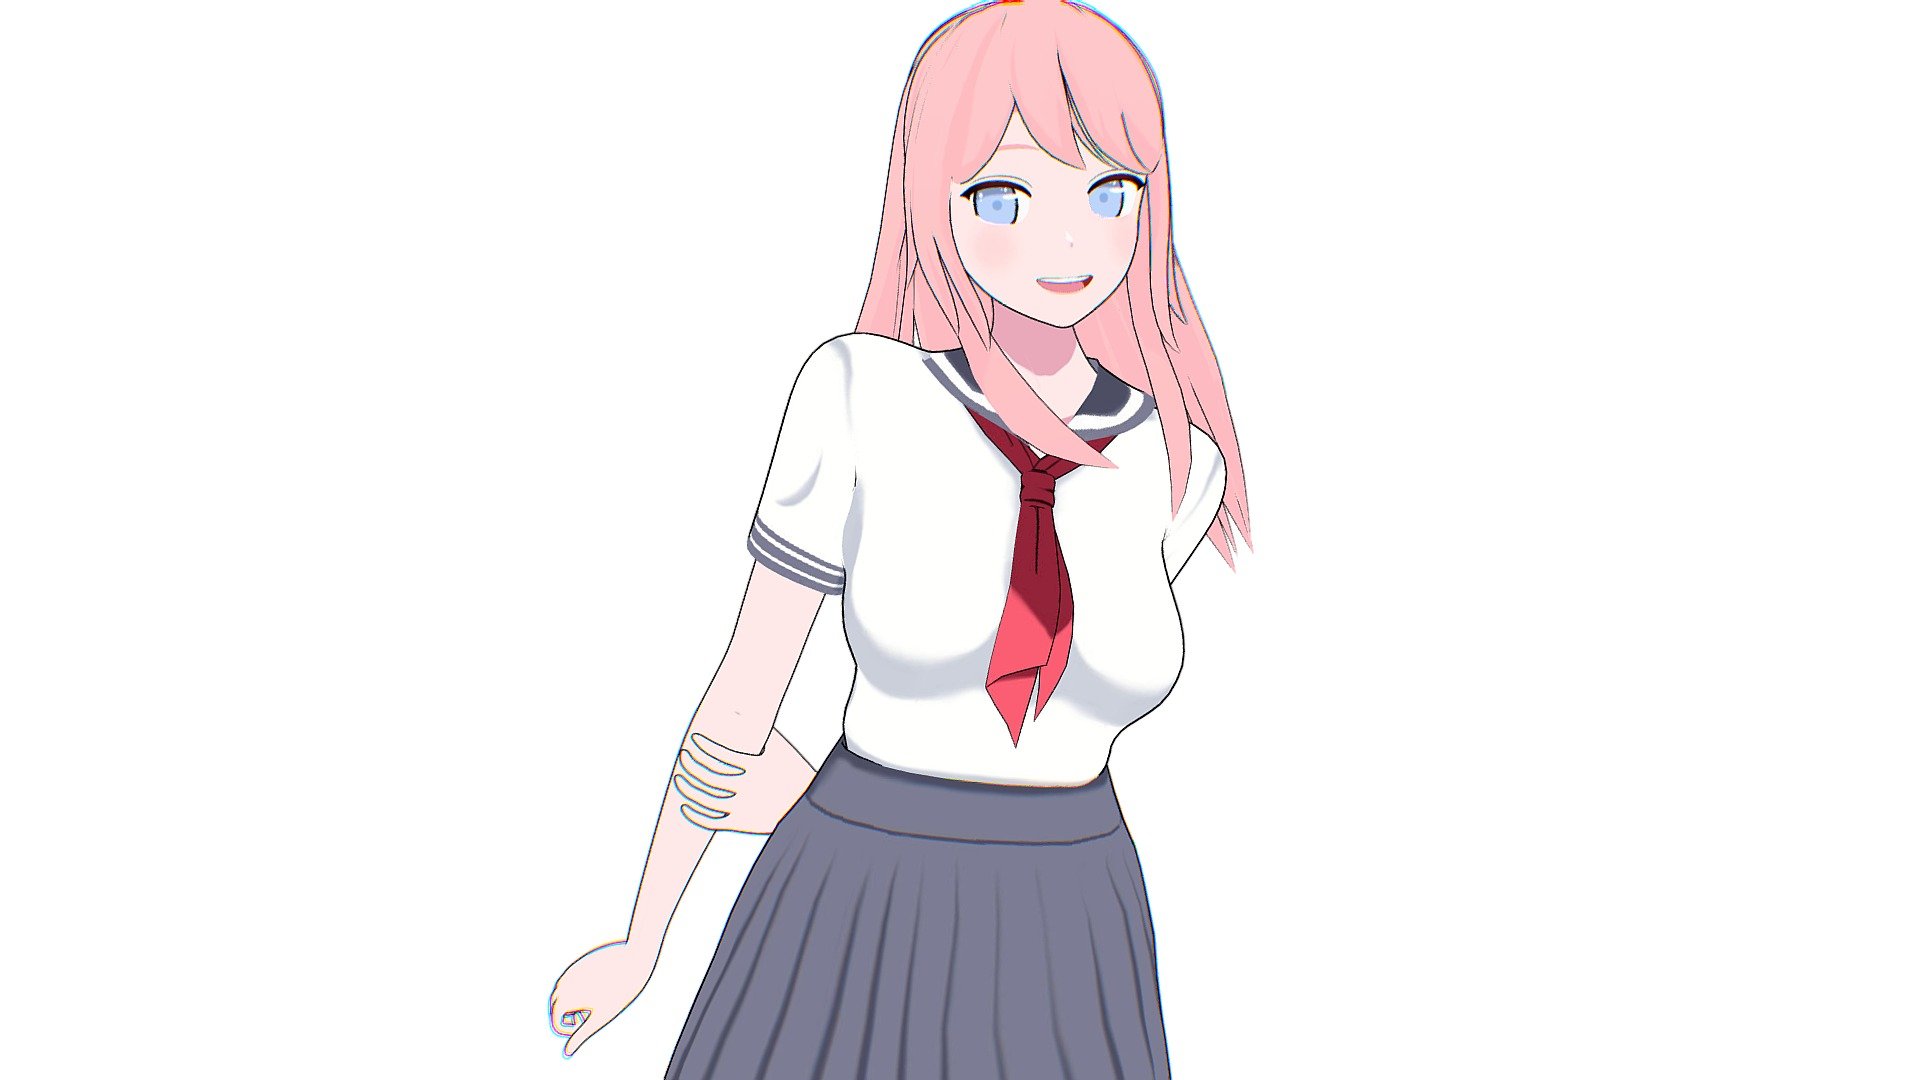 &ldquo;I am a cheerful and energetic anime girl with a positive personality and a smile always on my face. I love making new friends and I am always willing to help those in need.